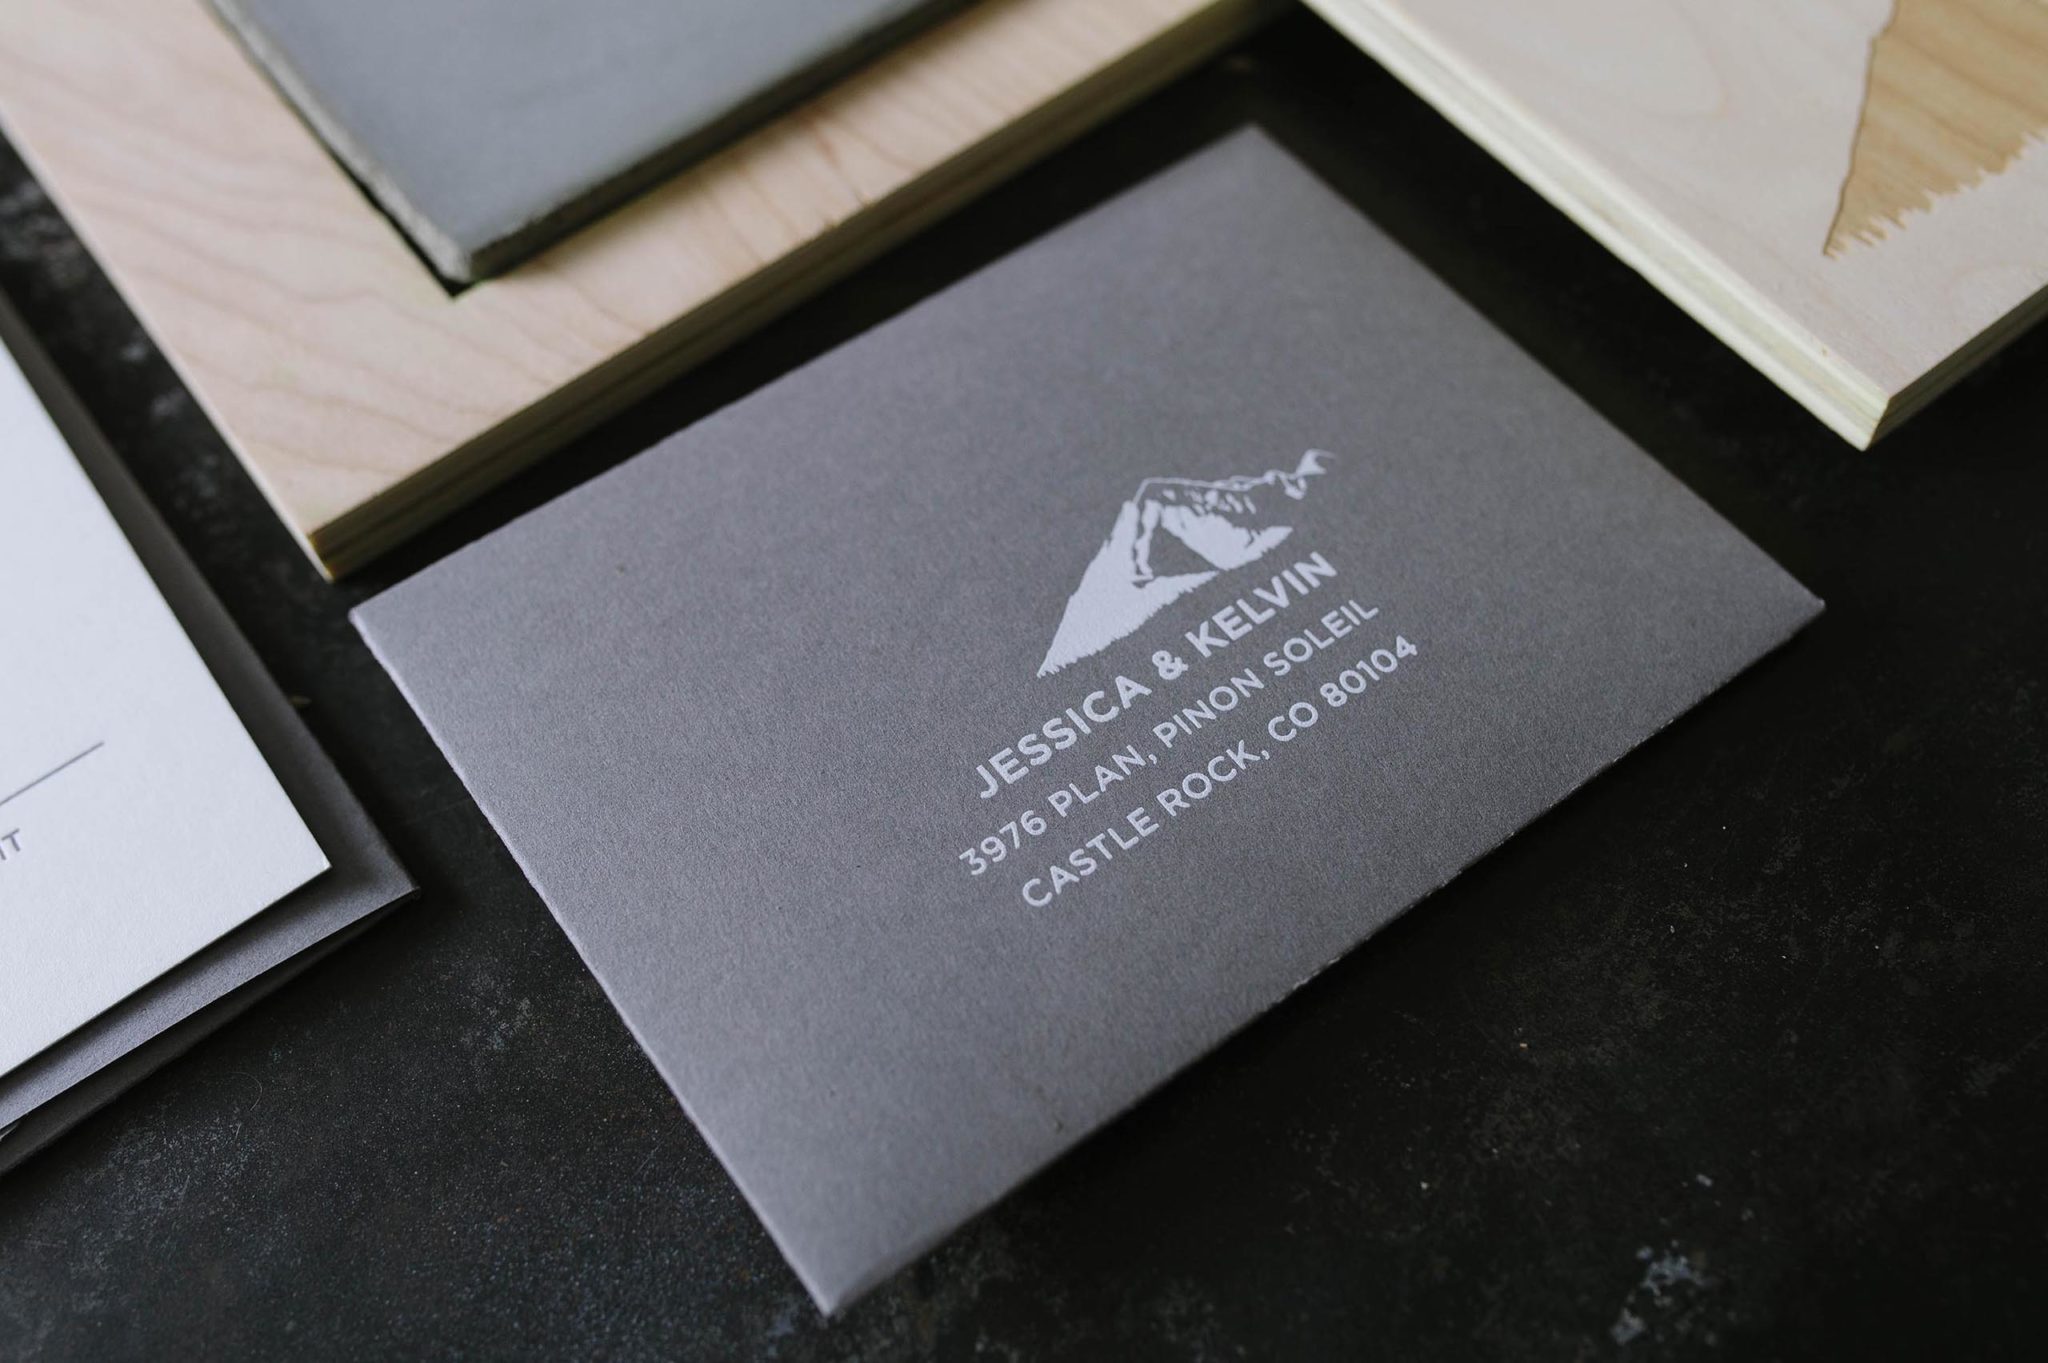 Concrete (screenprinted) and Wood (laser-engraved) Luxury Wedding Invitation from A Fine Press